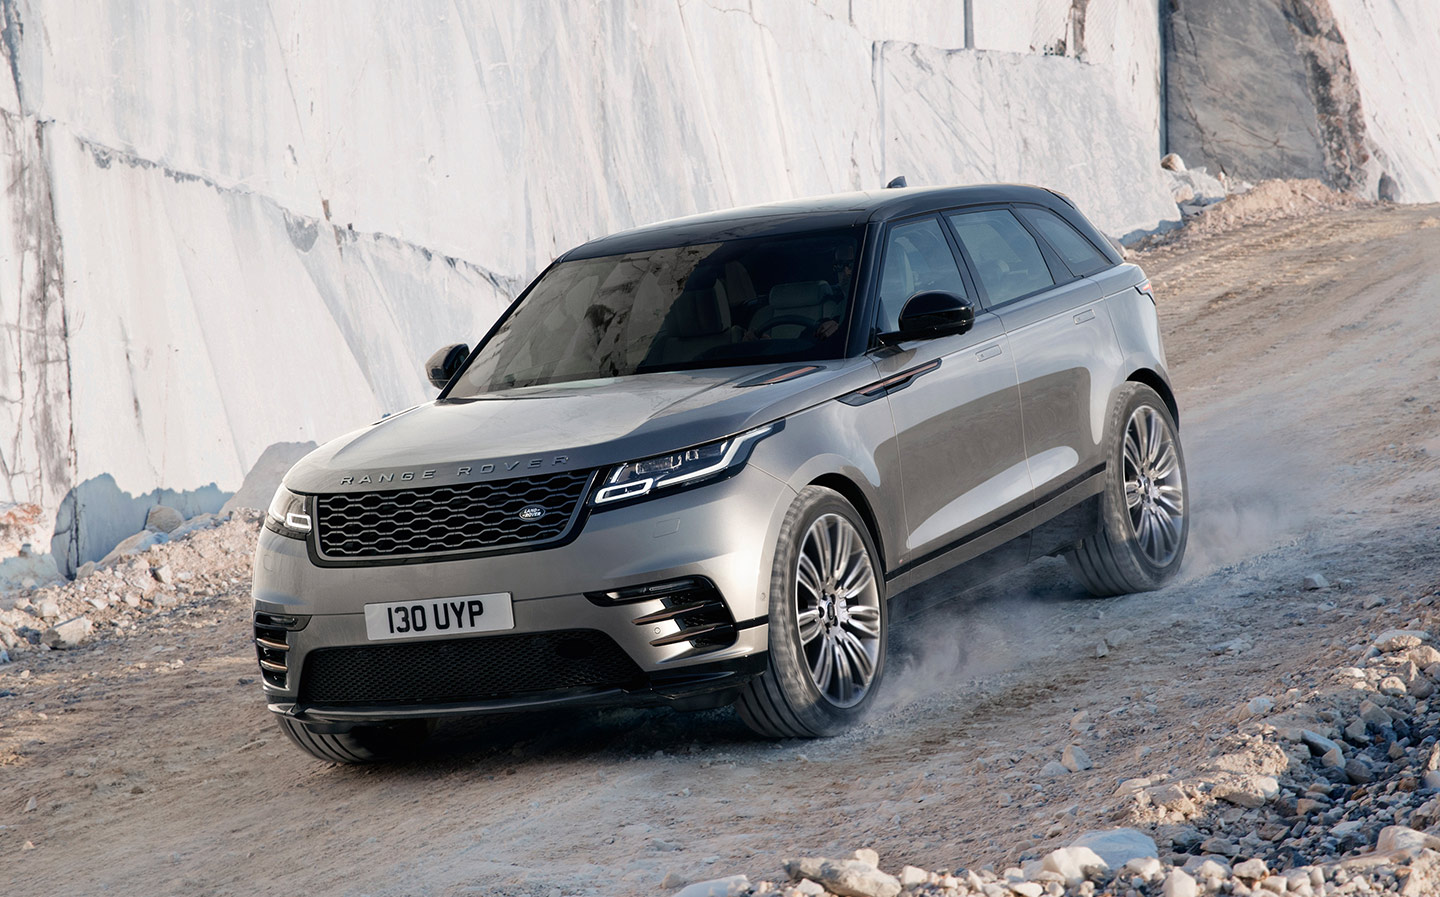 The Motor Awards 2018: Vote for your best sports car of the year - Range Rover Velar